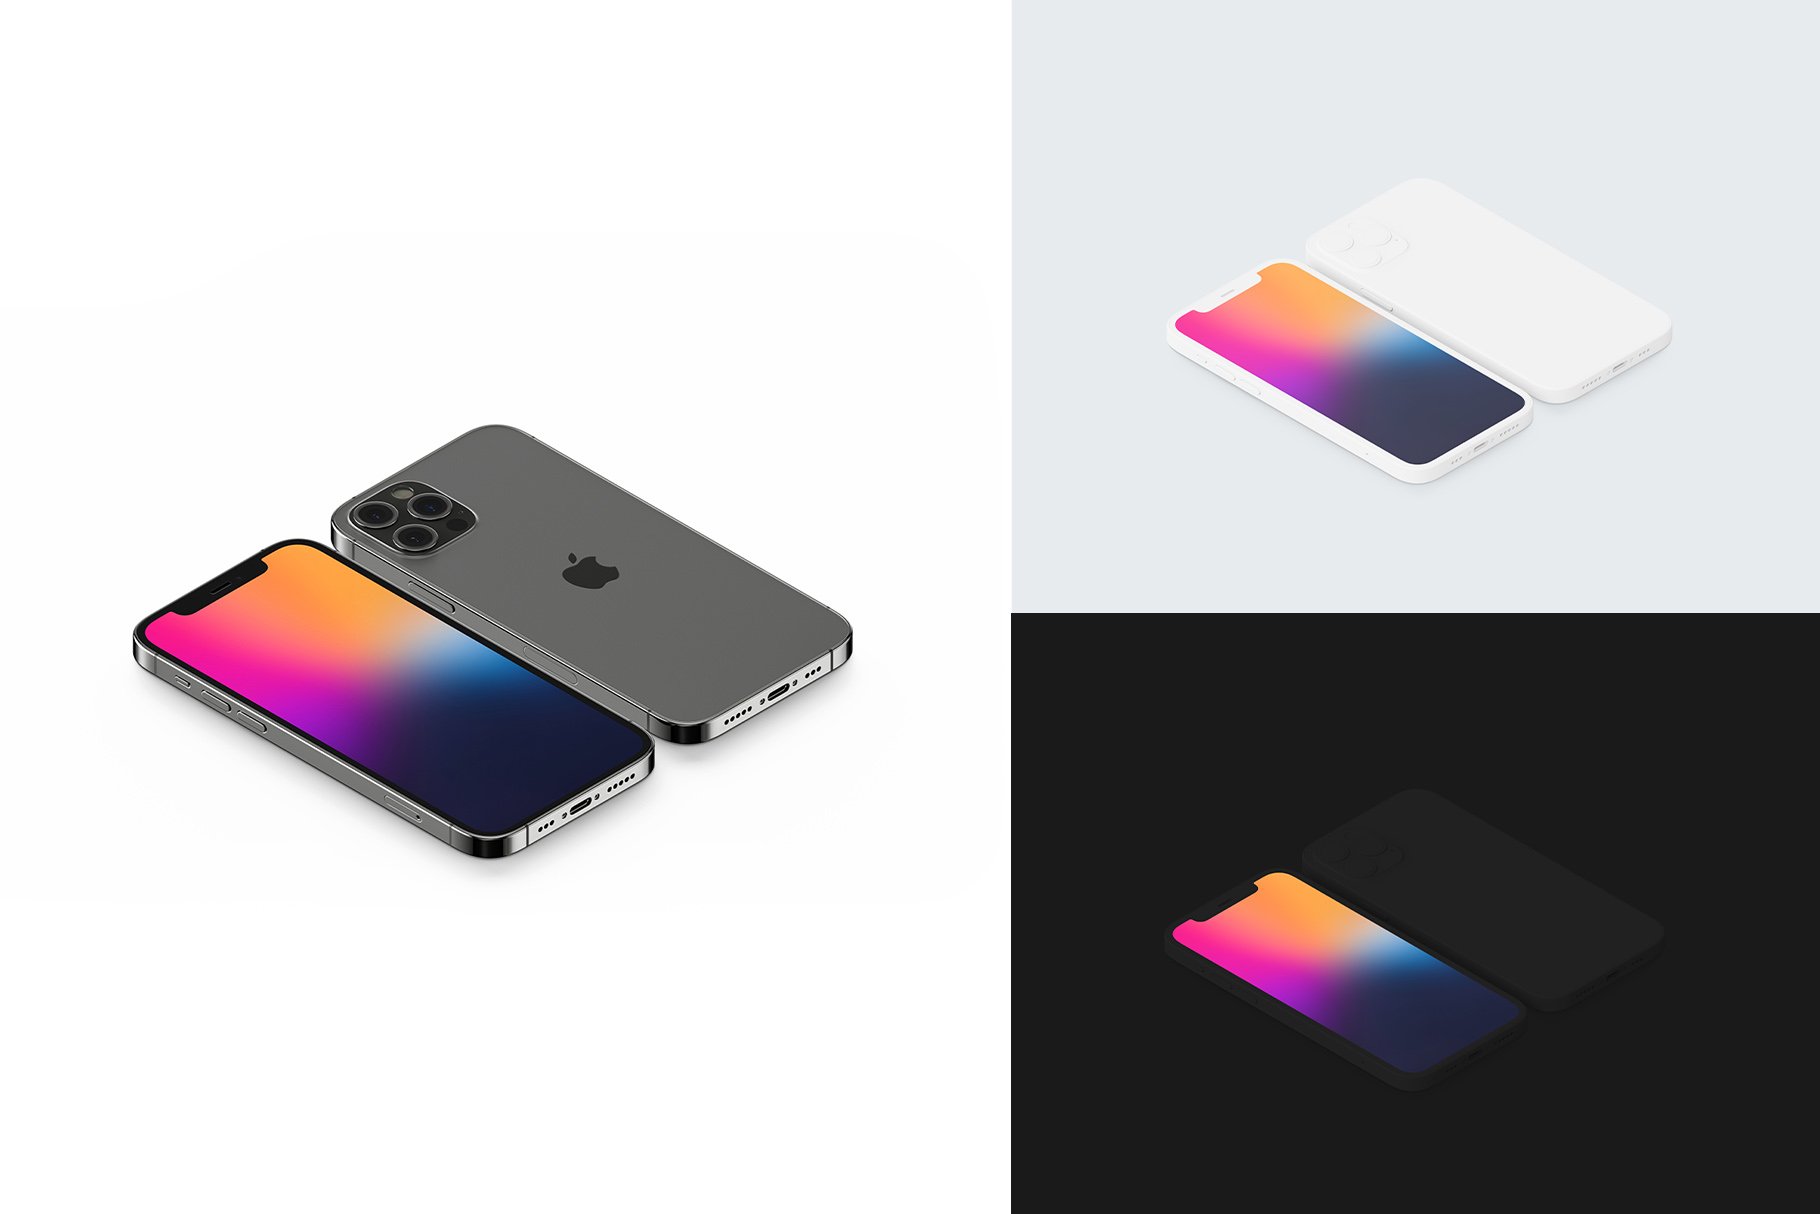 iphone 12 pro mockup pack by anthony boyd graphics 2810c29 812